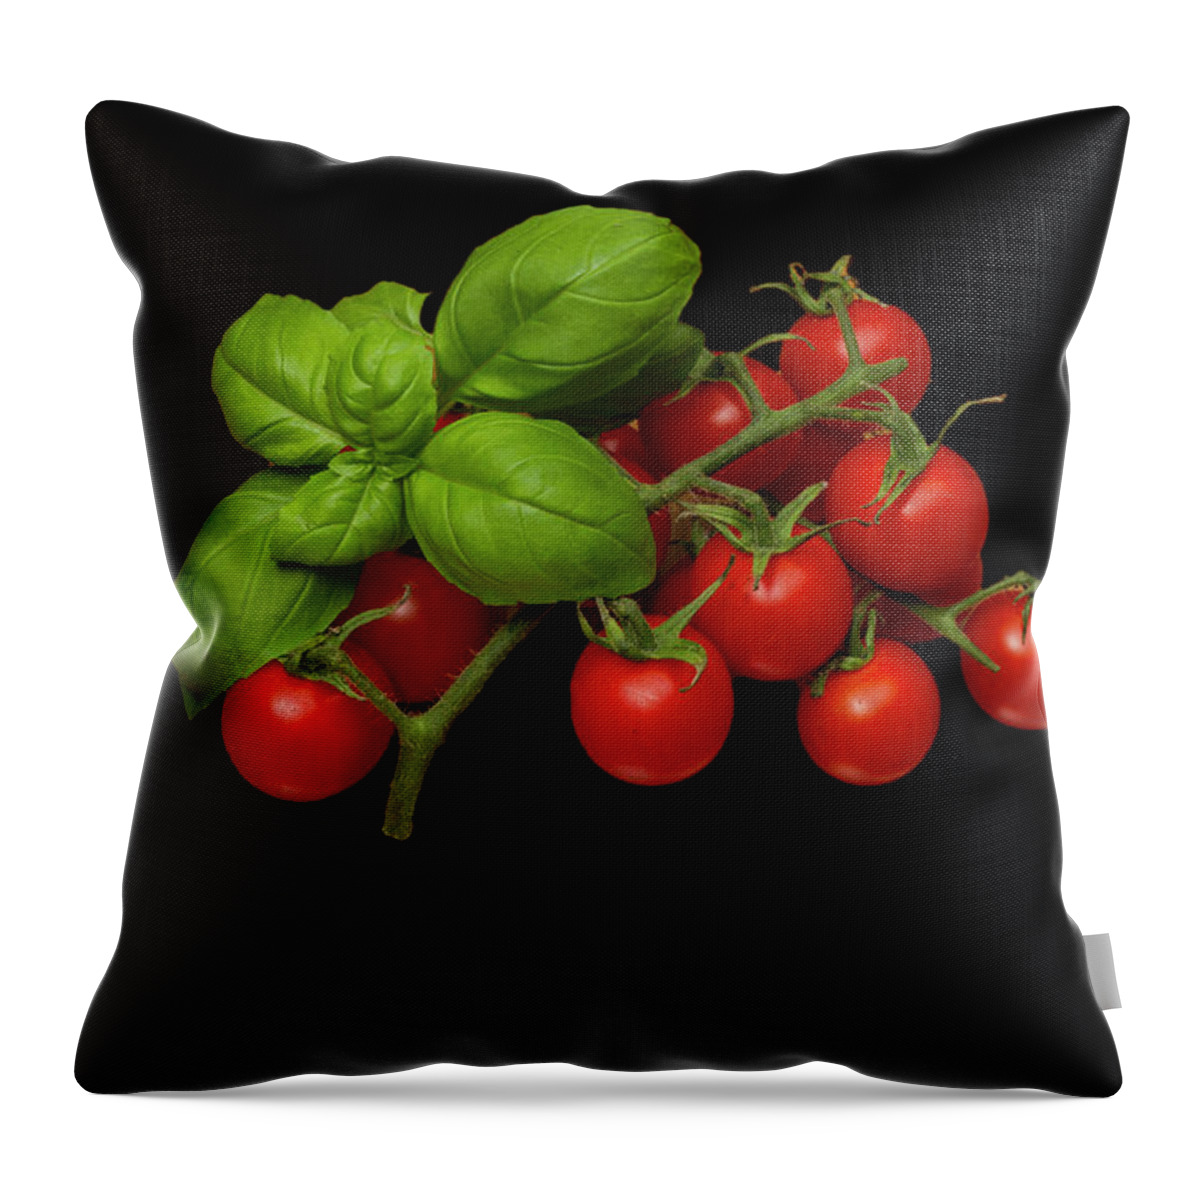 Basil Throw Pillow featuring the photograph Plum Cherry Tomatoes Basil by David French